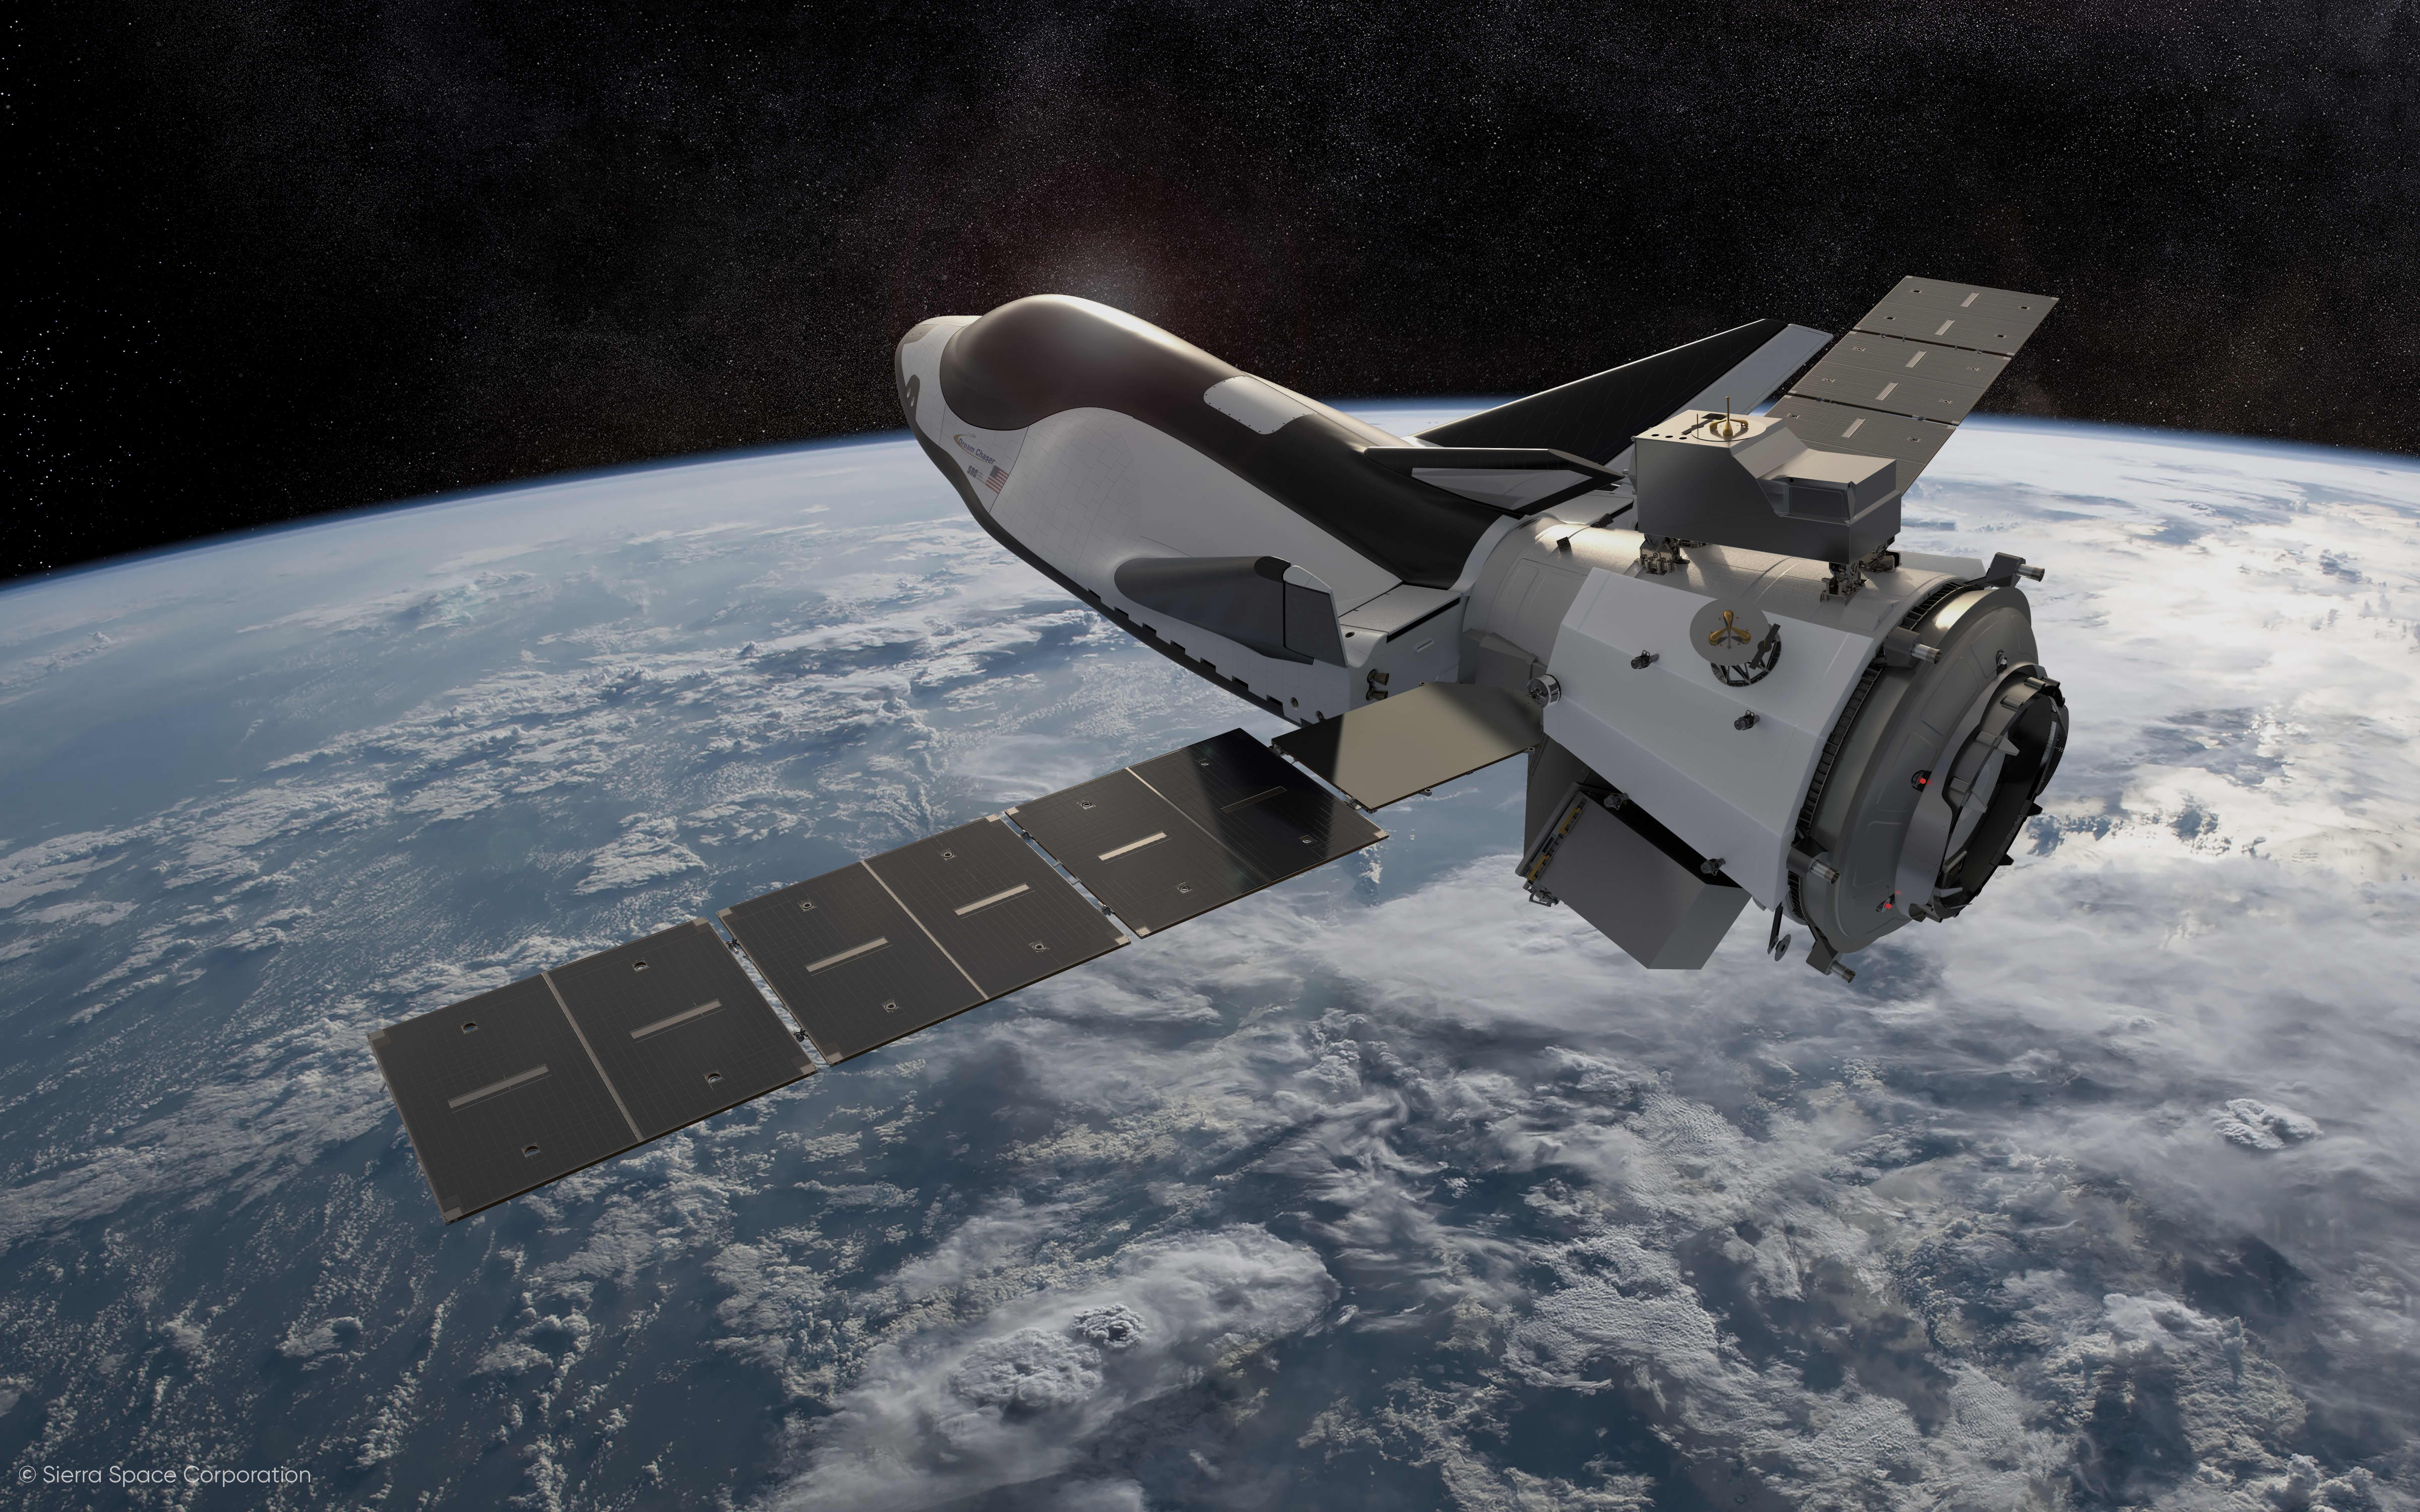 Sierra Space Plans to Launch Mini Space Shuttle Next Year